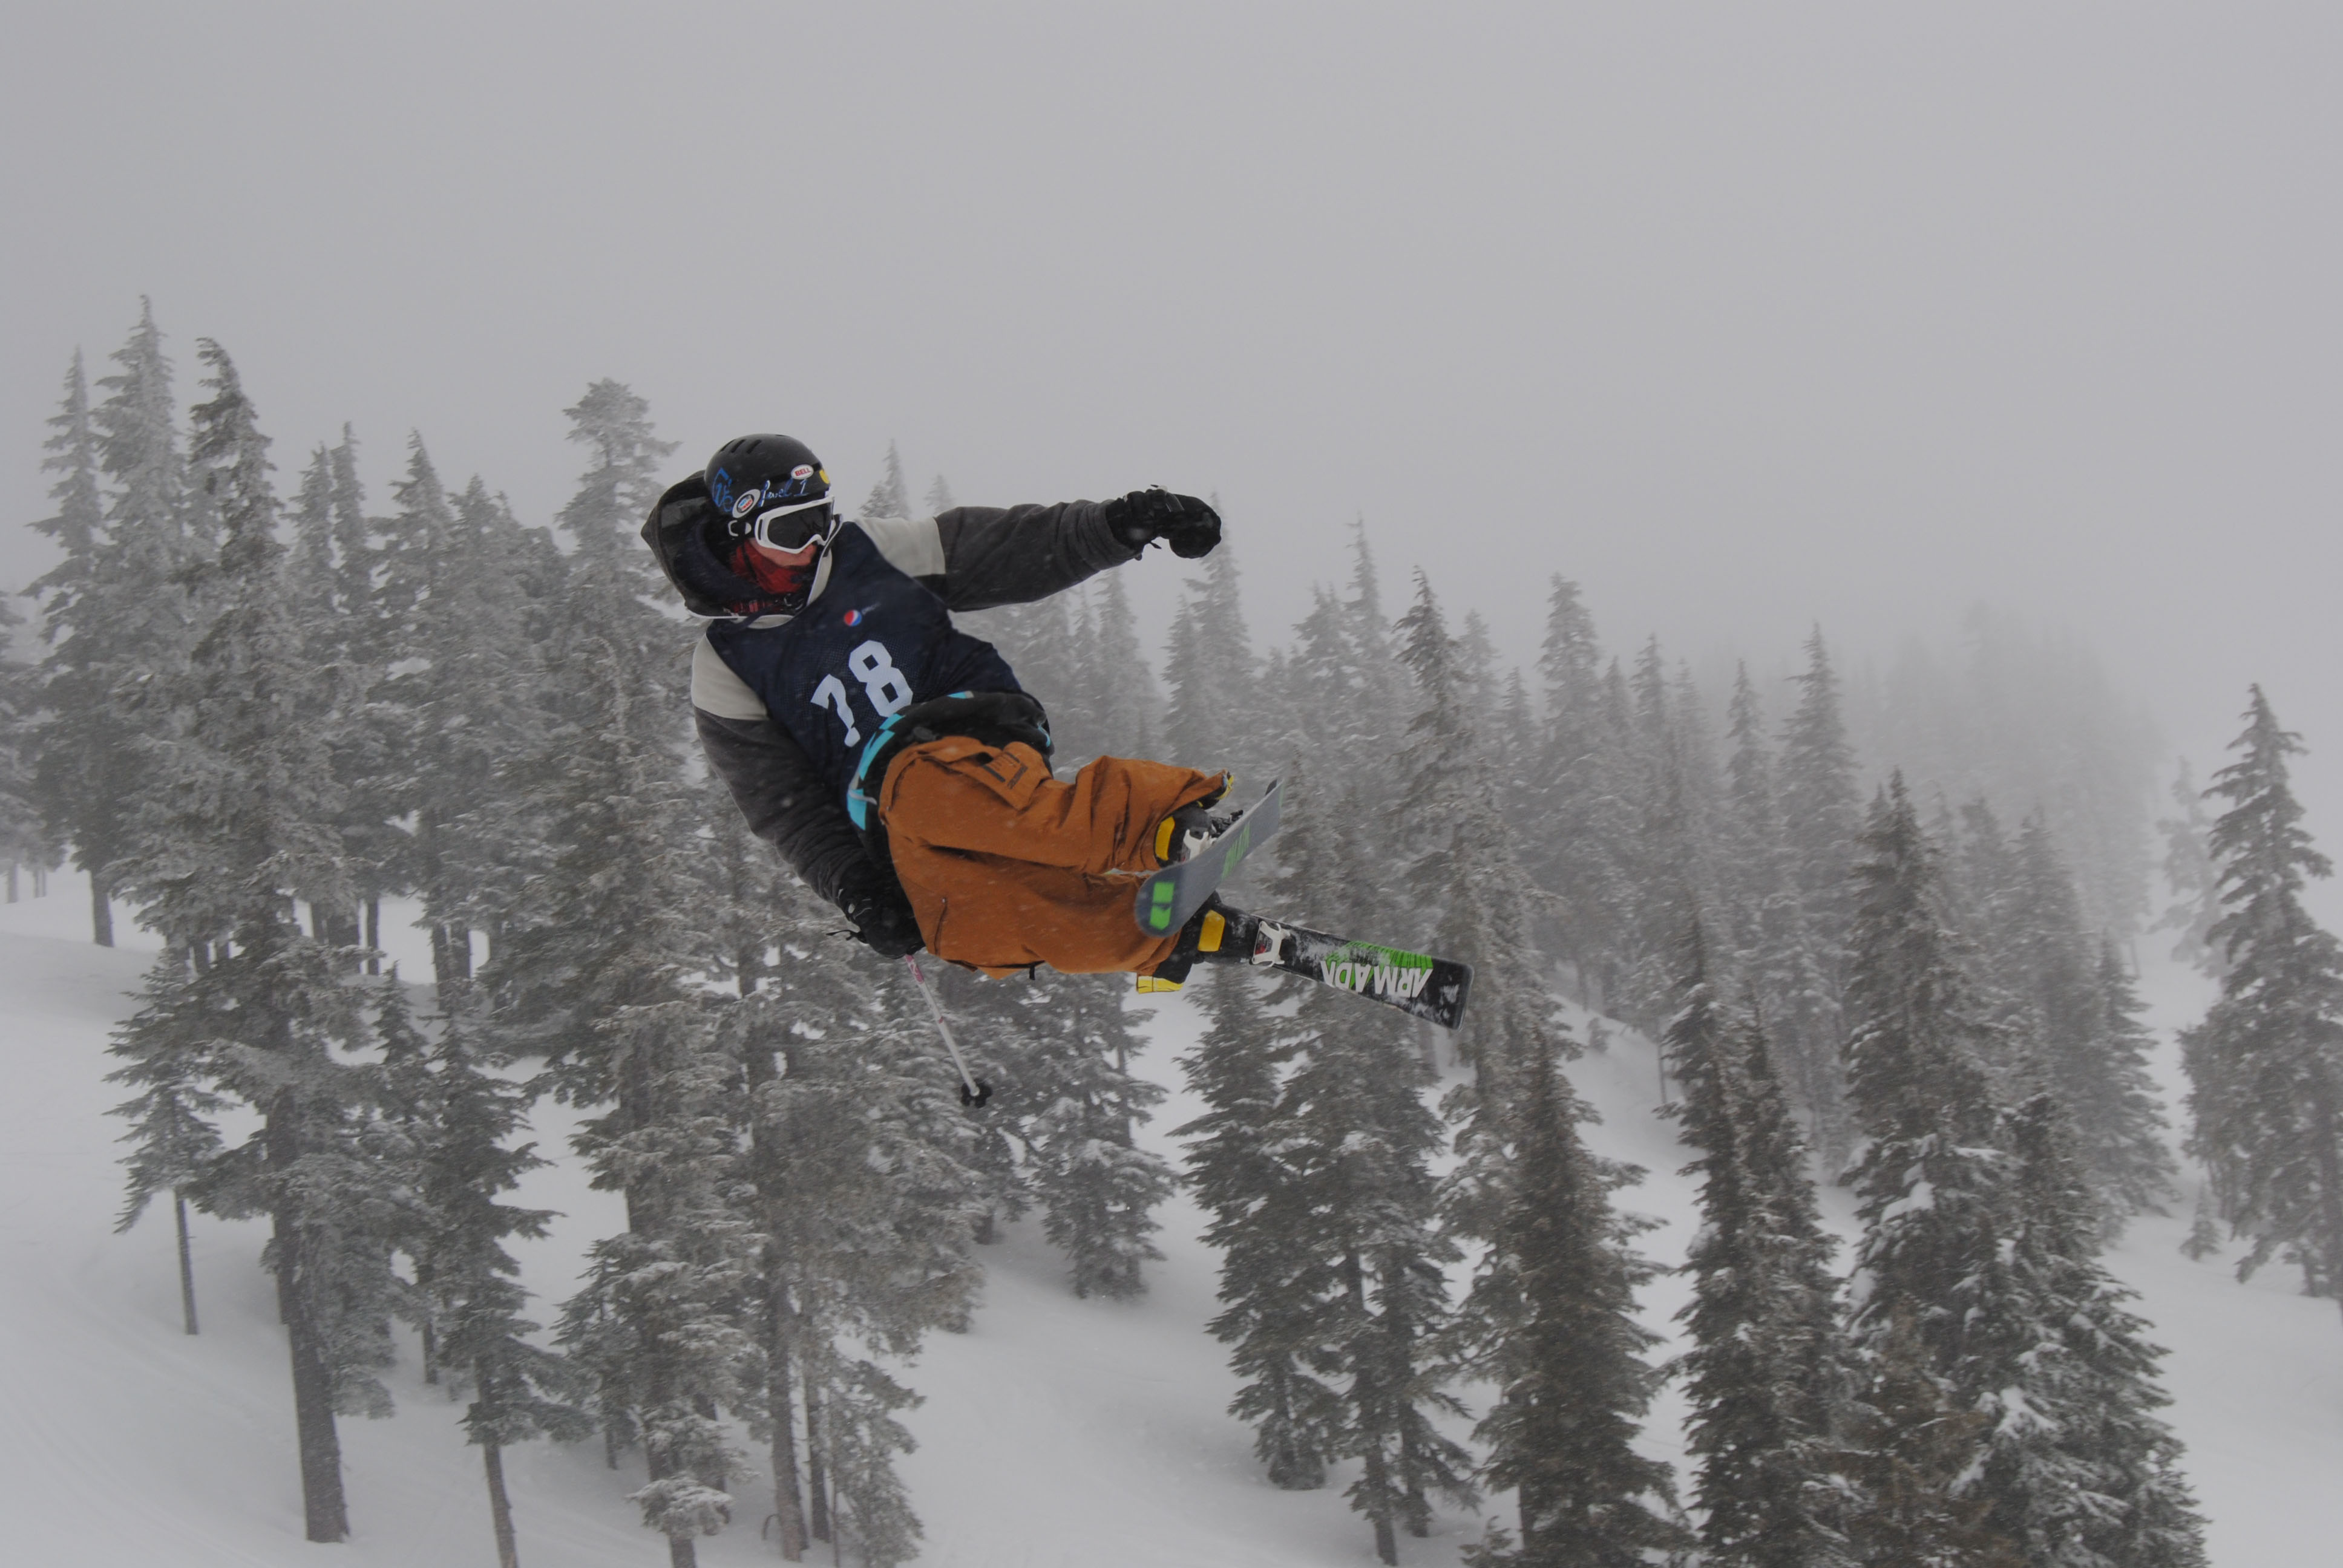 Stomping Hard At The 2014 Dakine Slopestyle Comp